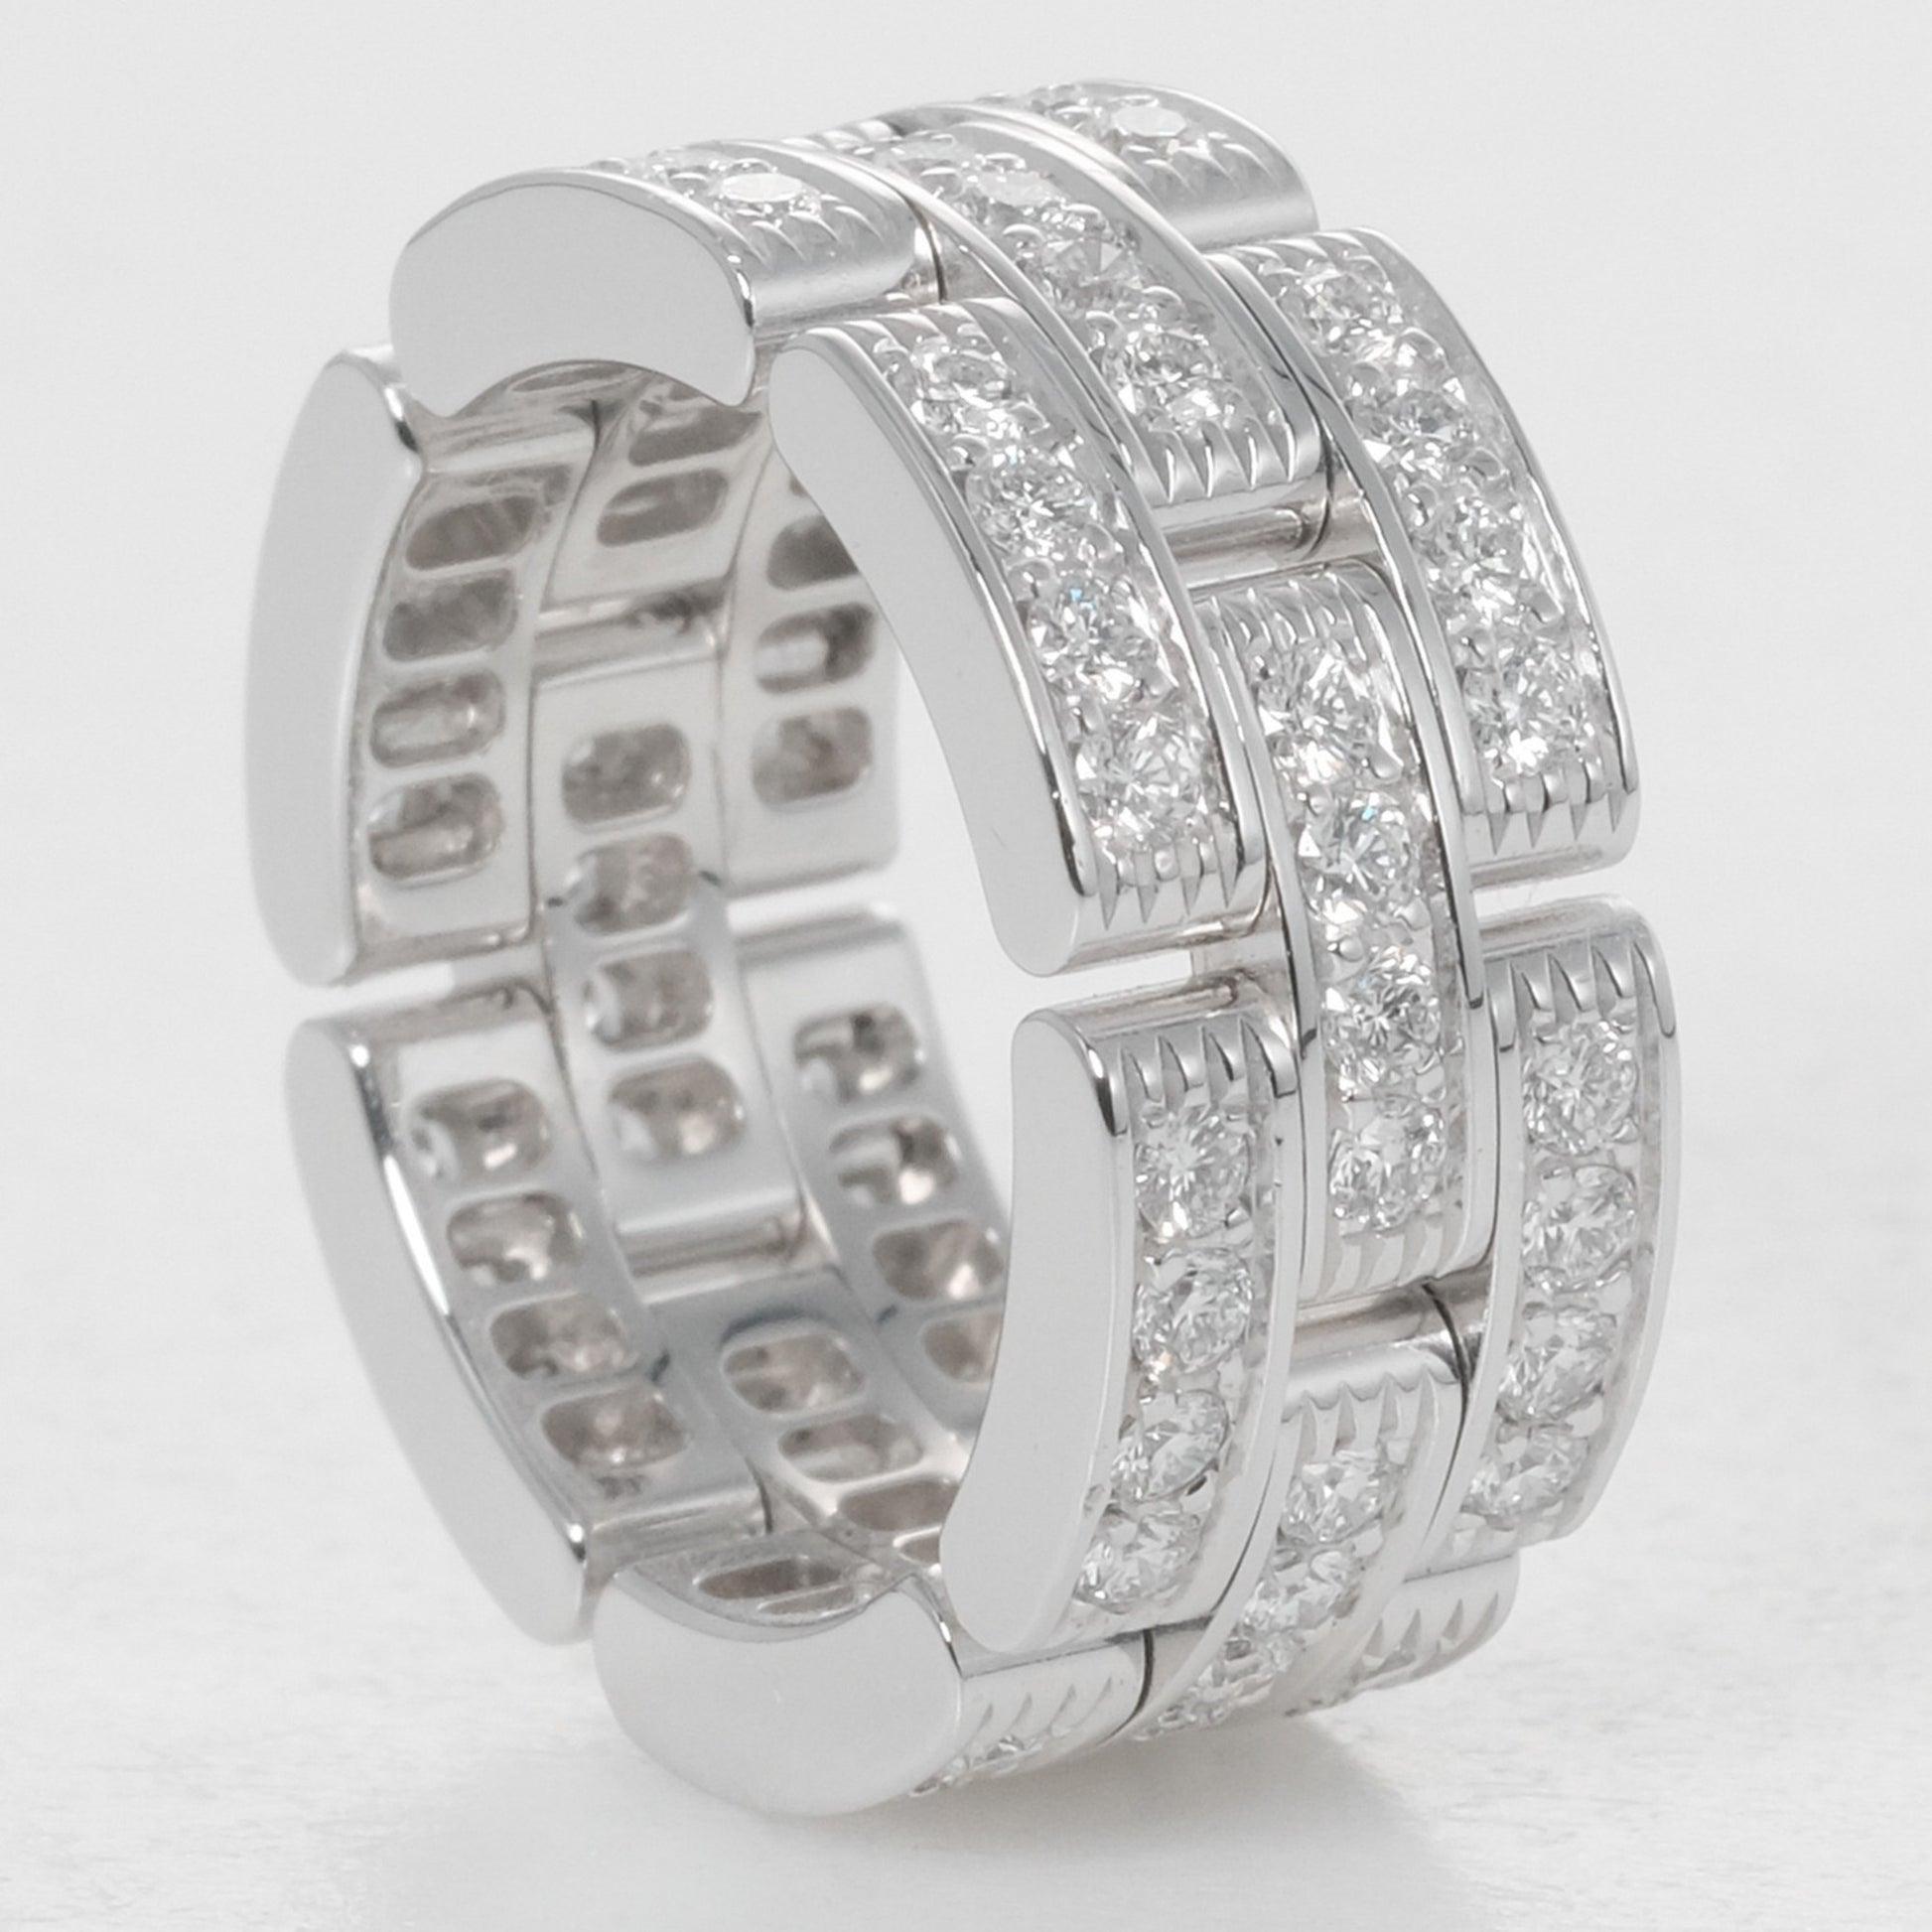 Women's Cartier Maillon Panthere 3 Row Diamond Ring in 18K White Gold For Sale